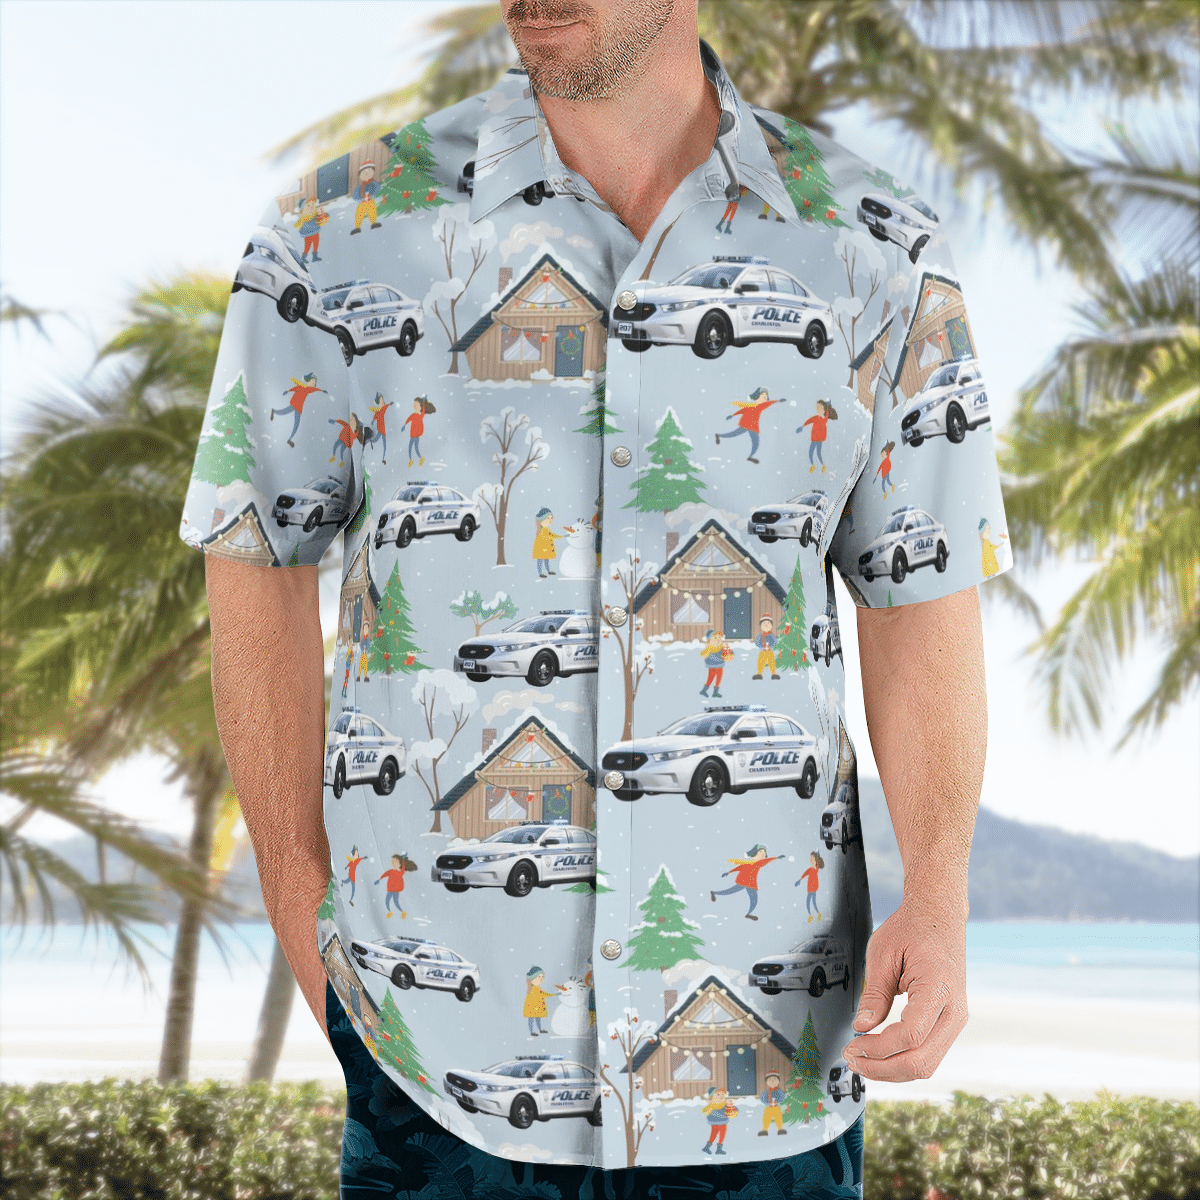 There are several styles of beach and Hawaiian shorts and tops to choose from 153